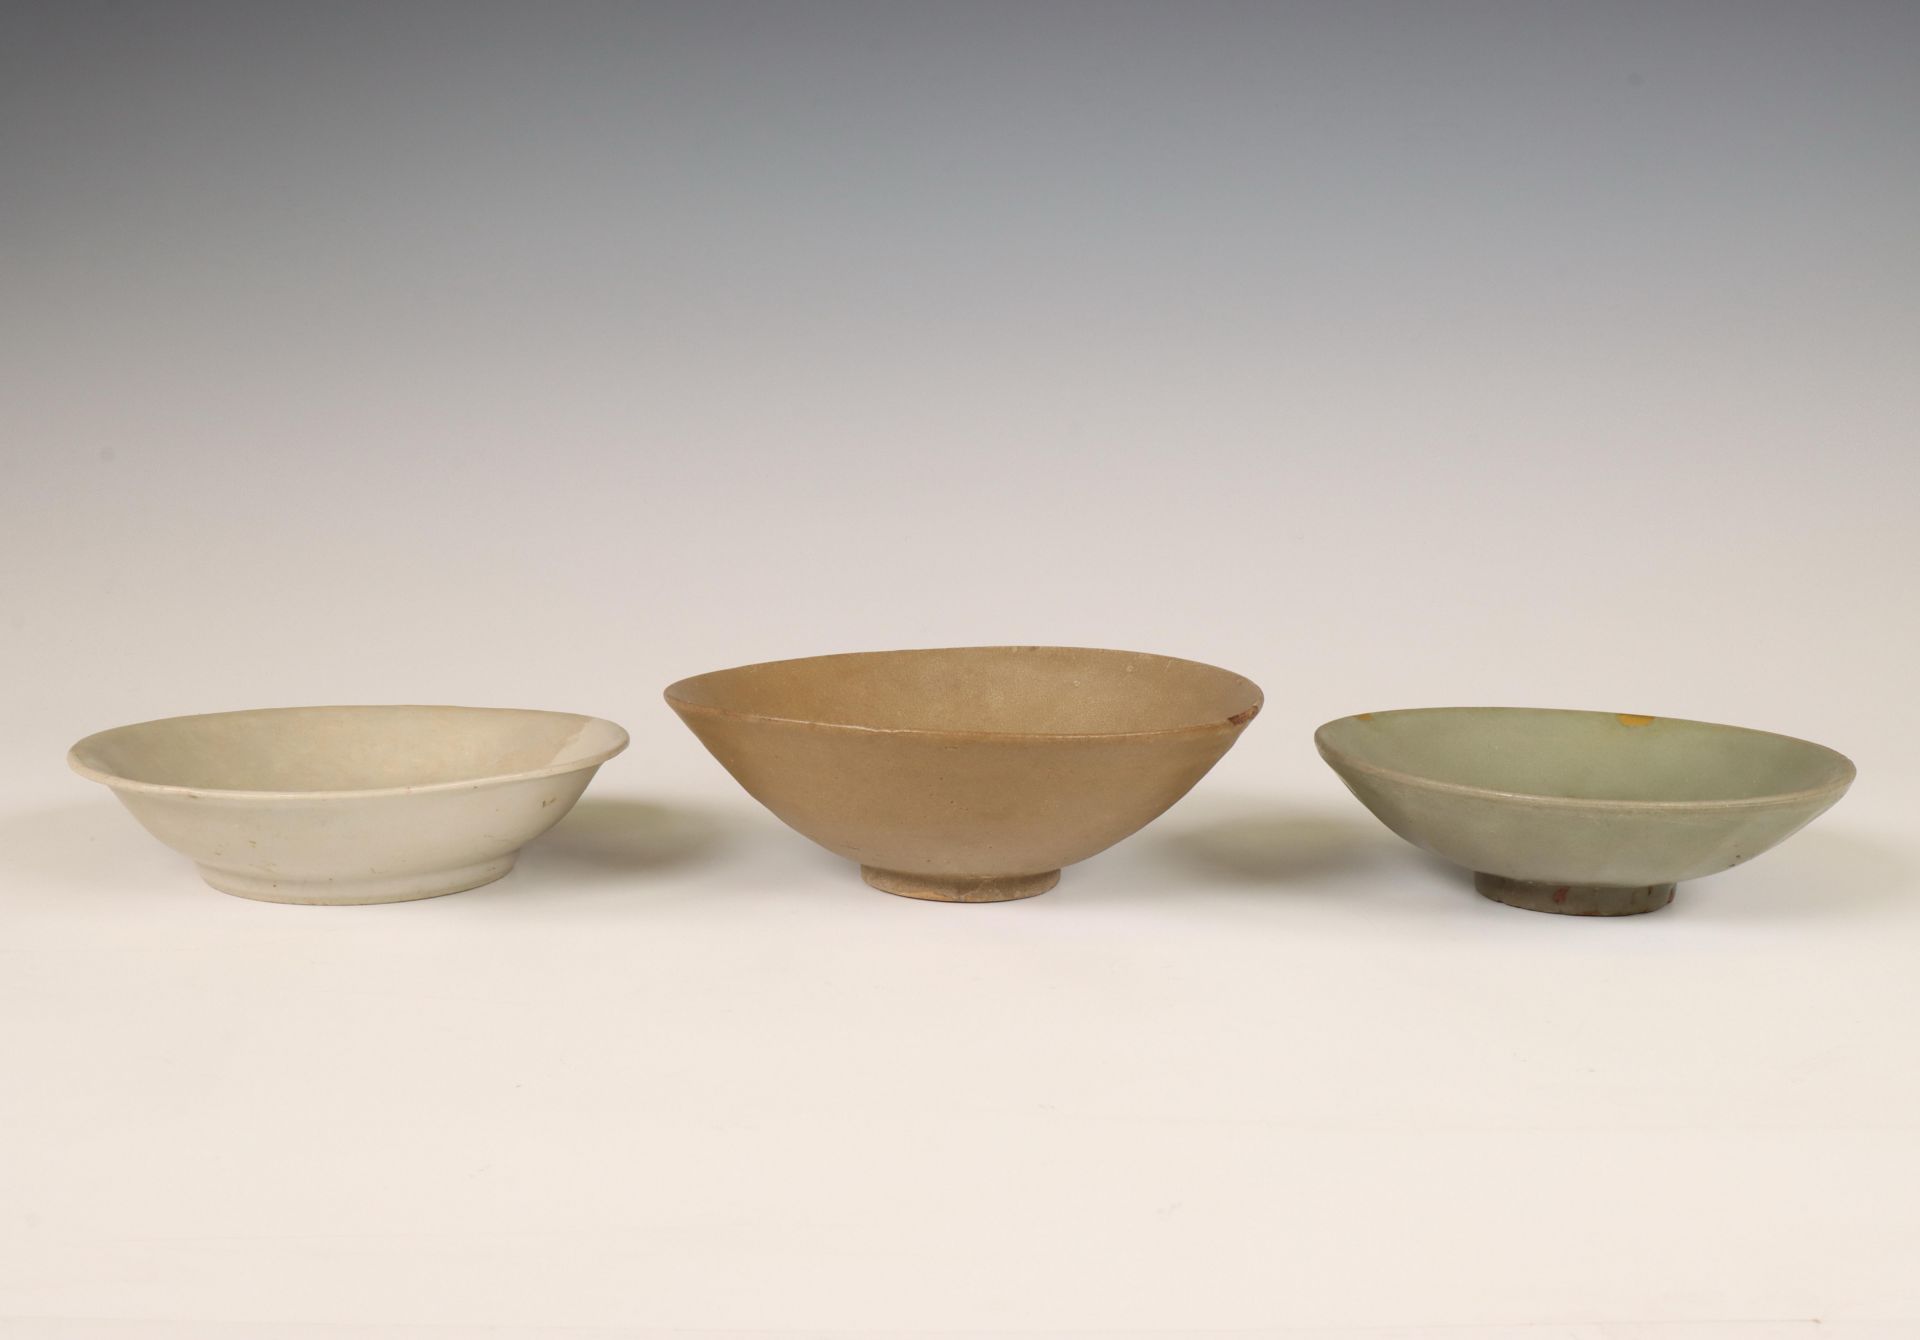 China, three various celadon-glazed bowls, Song dynasty (960-1279) and later,